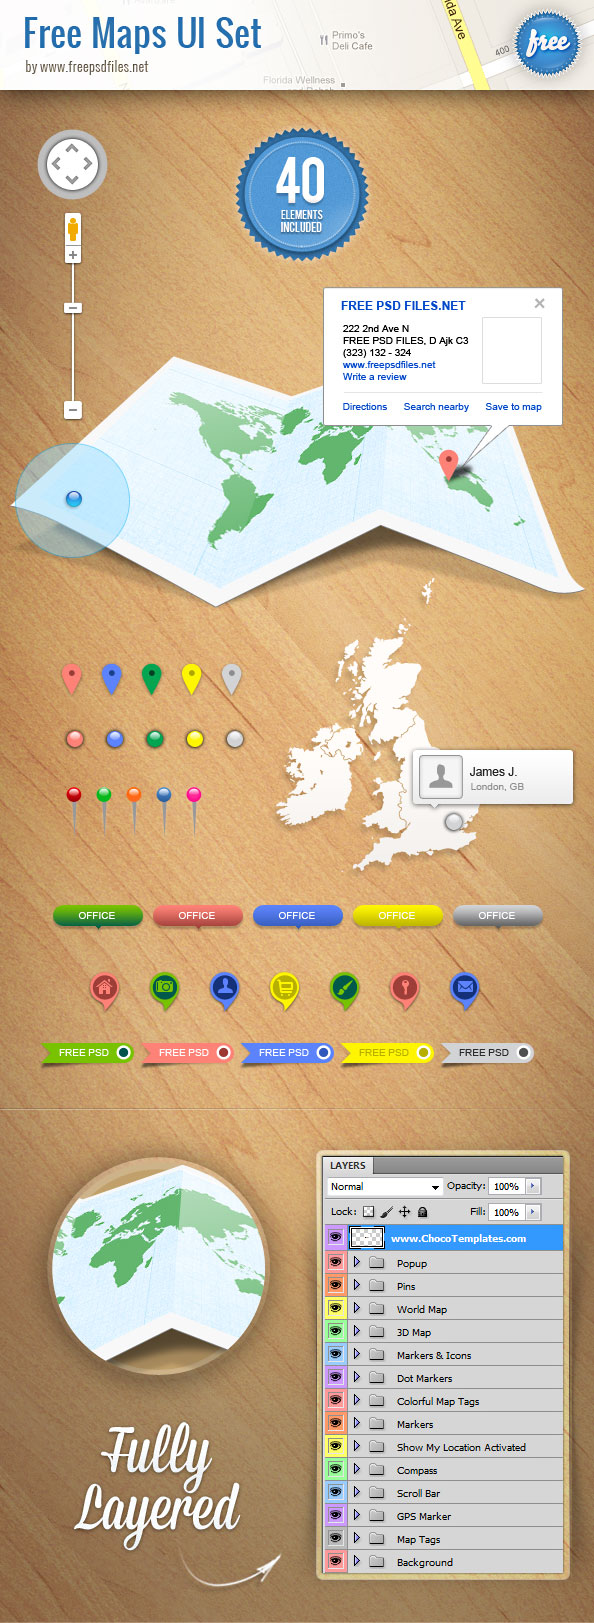 Maps UI Elements Pins and Tabs PSD Set